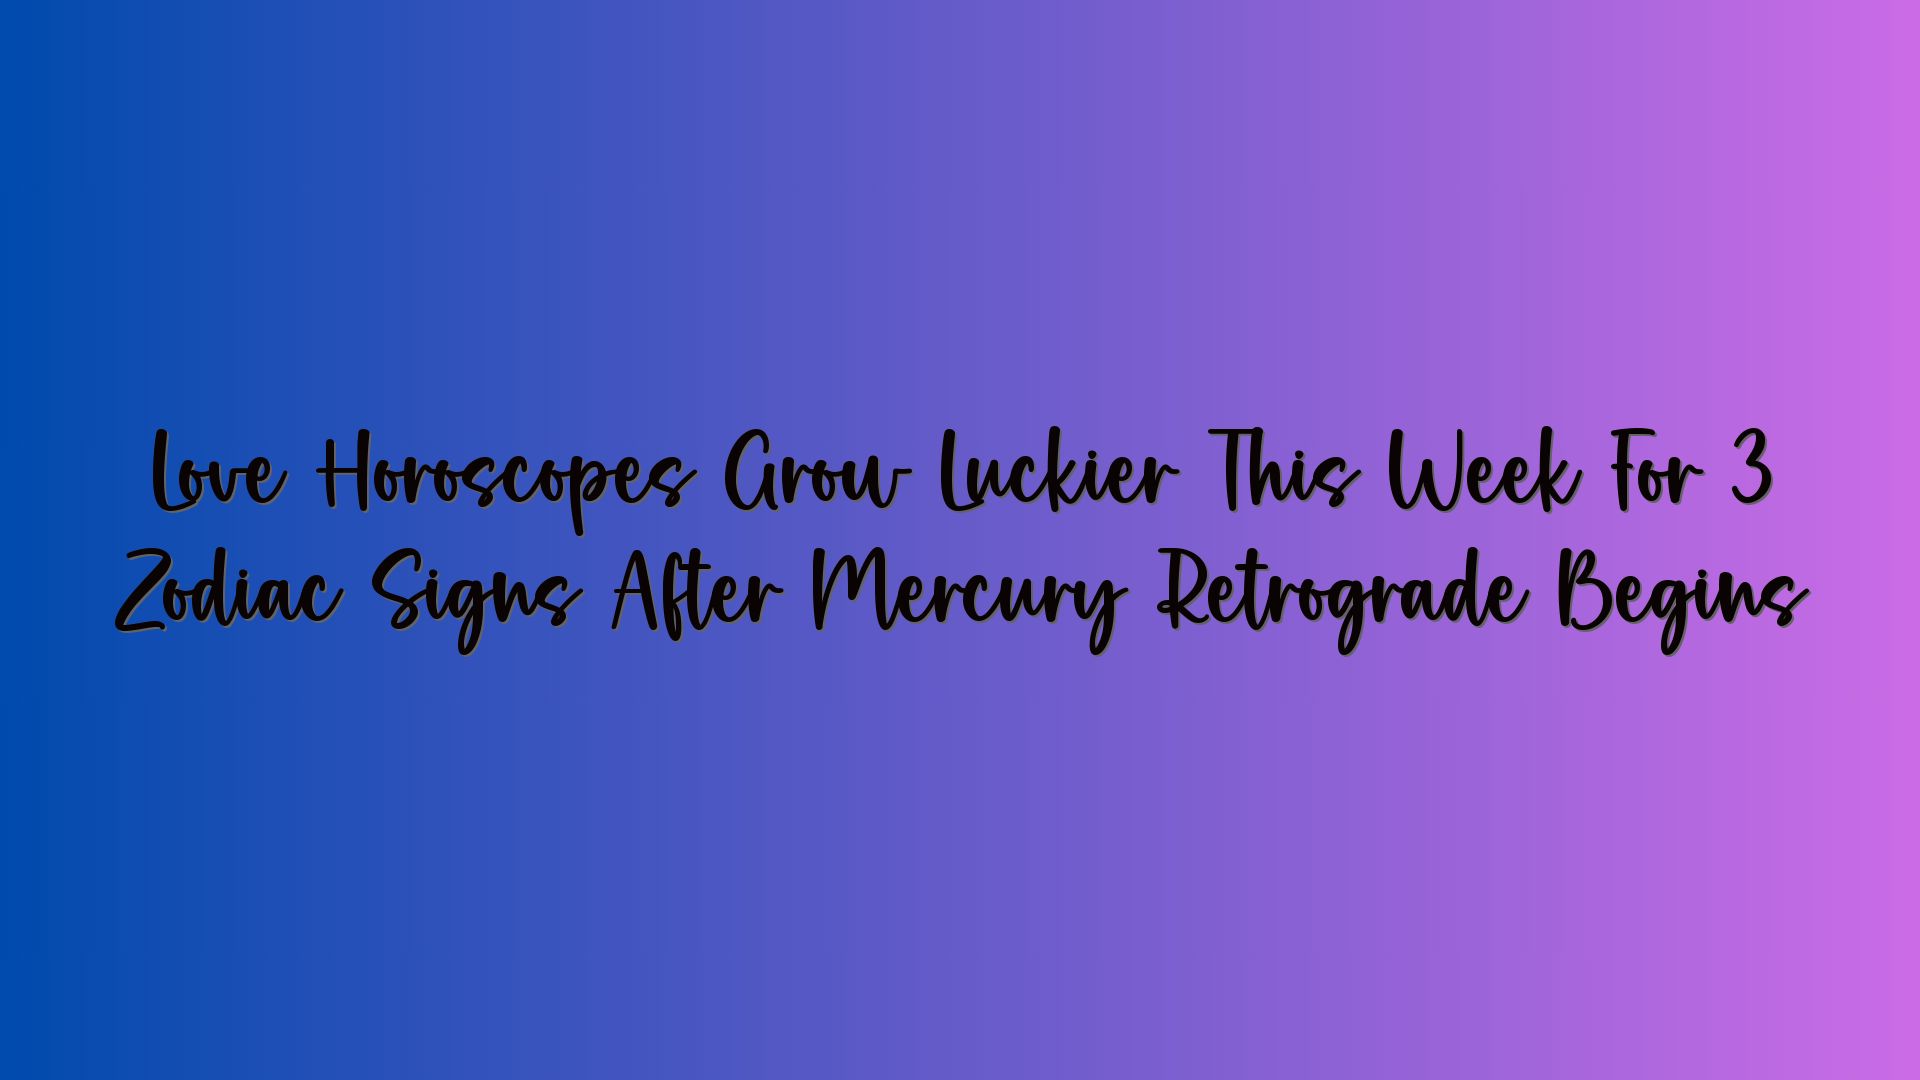 Love Horoscopes Grow Luckier This Week For 3 Zodiac Signs After Mercury Retrograde Begins